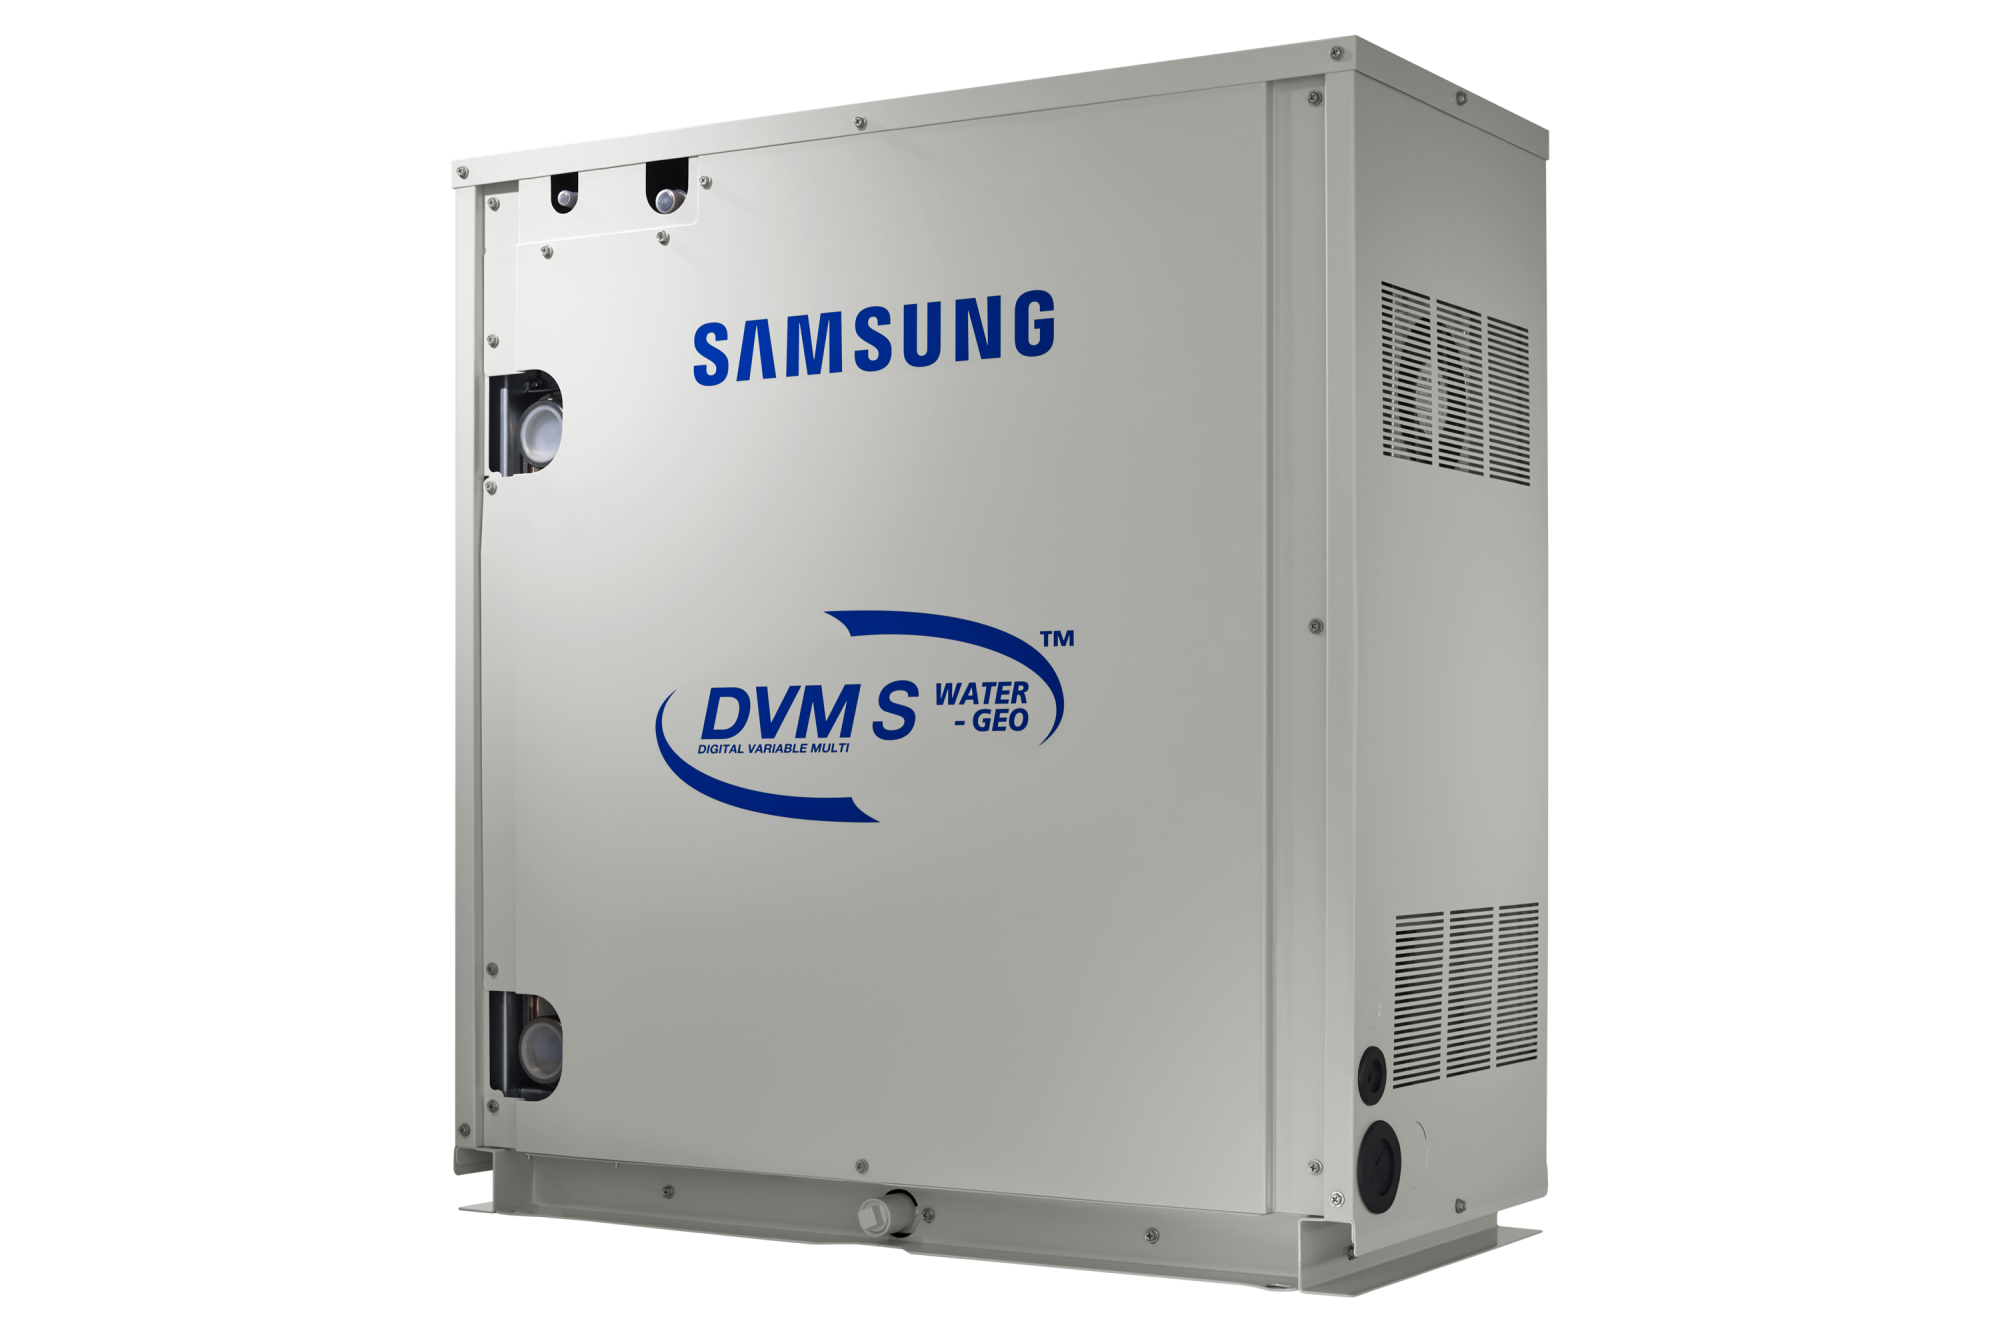 Samsung AM038KXWDCH/AA Air Conditioner DVM S Series, Water Condensing Unit